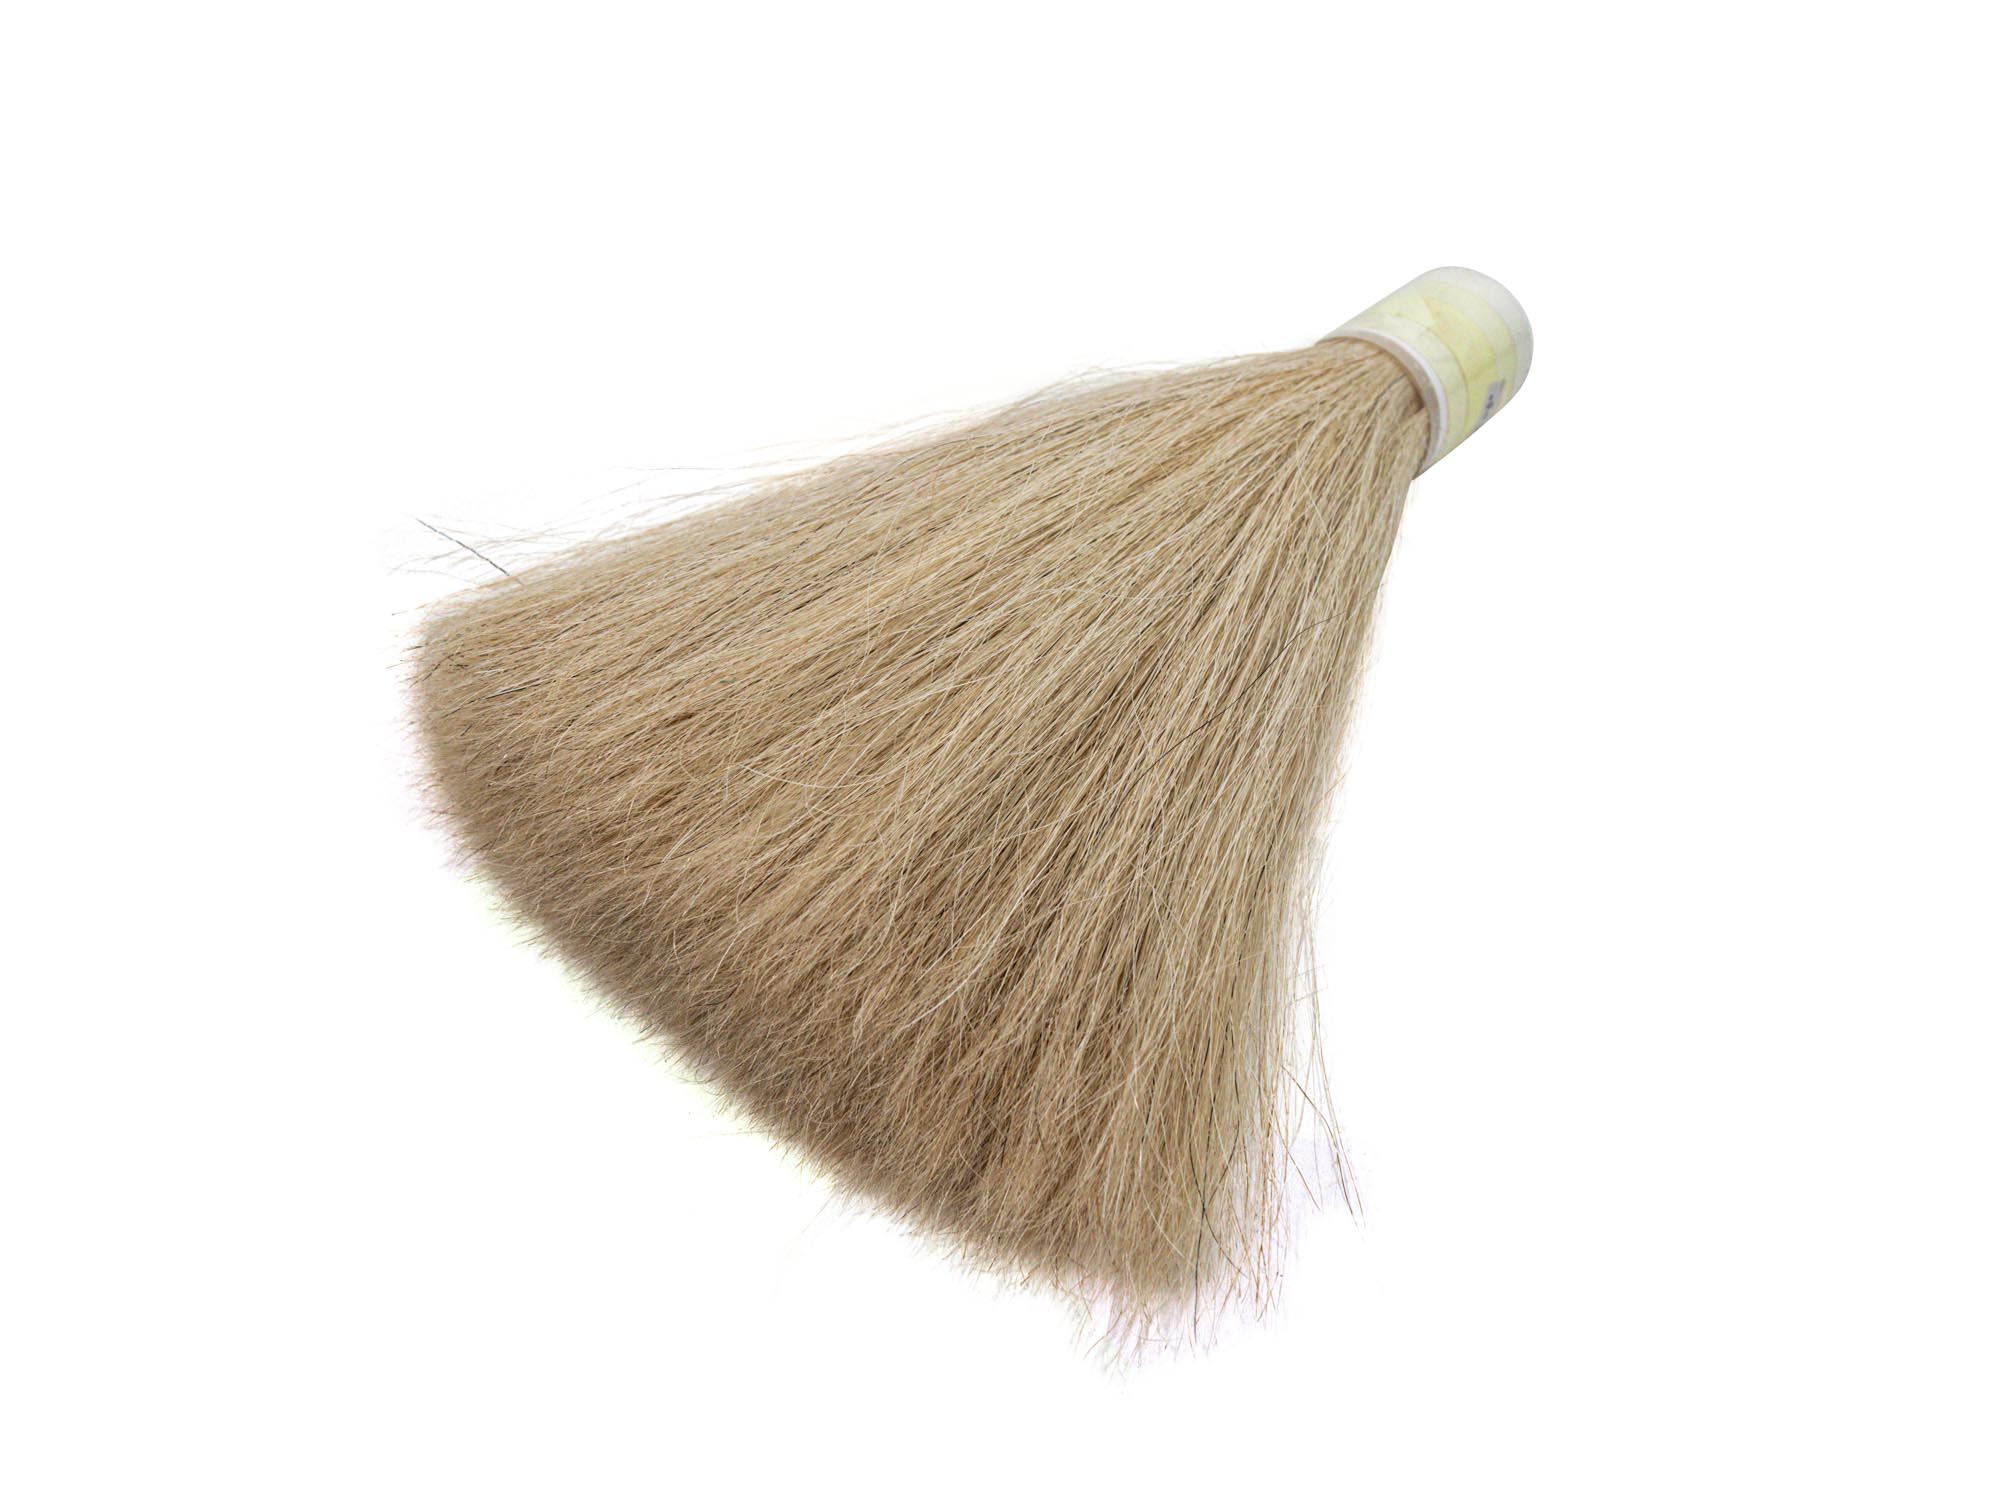  Horse Hair Brush for Cleaning | Made of Natural Brown Horse Hair